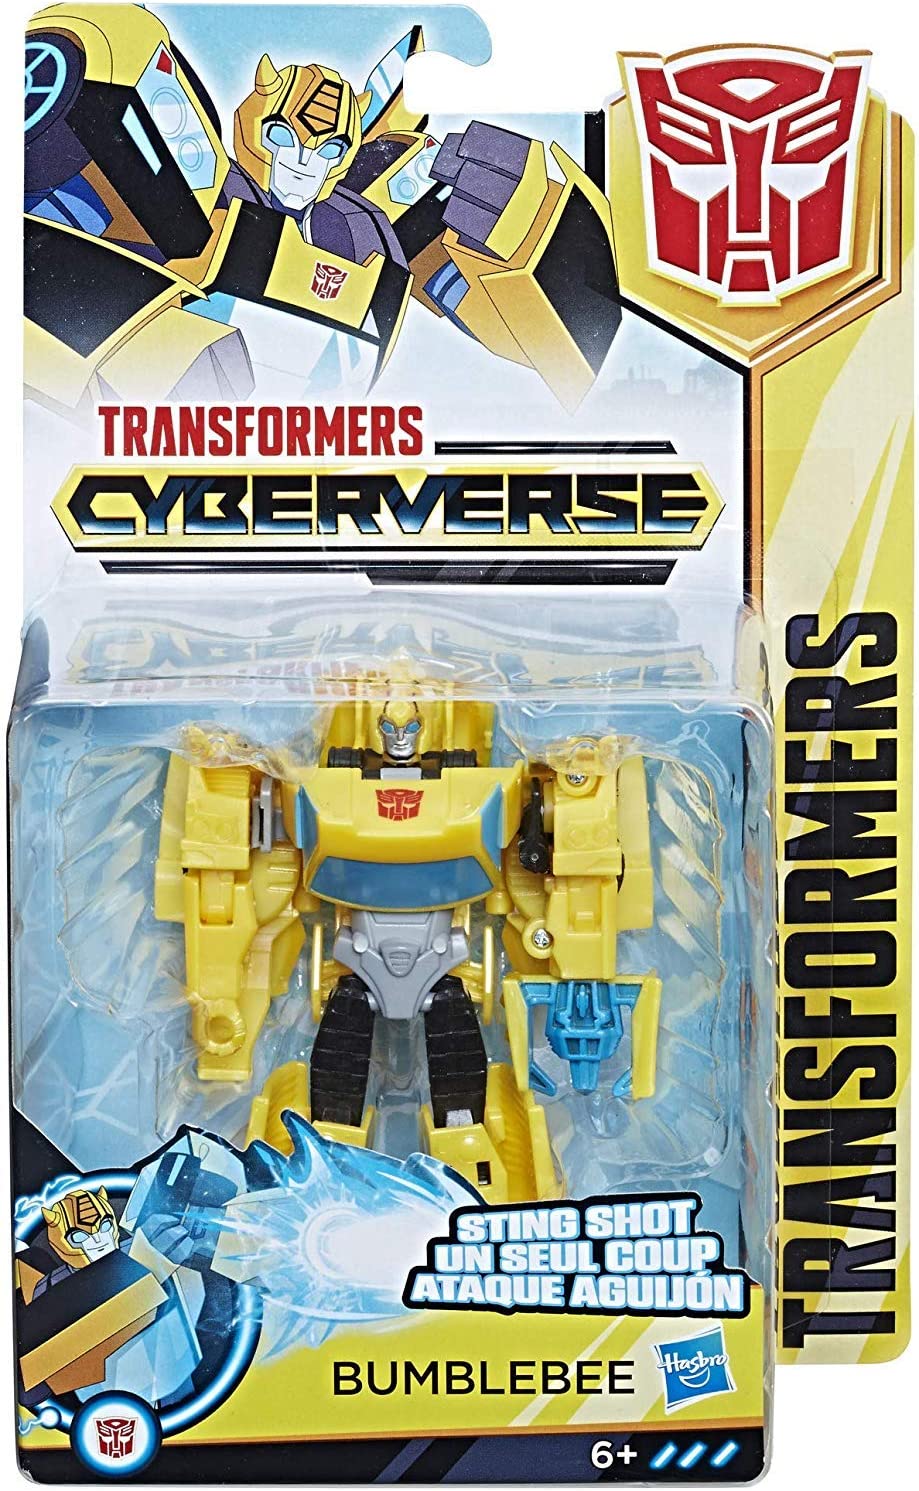 Transformers Cyberverse Action Attackers Warrior Bumblebee, Actionfigur